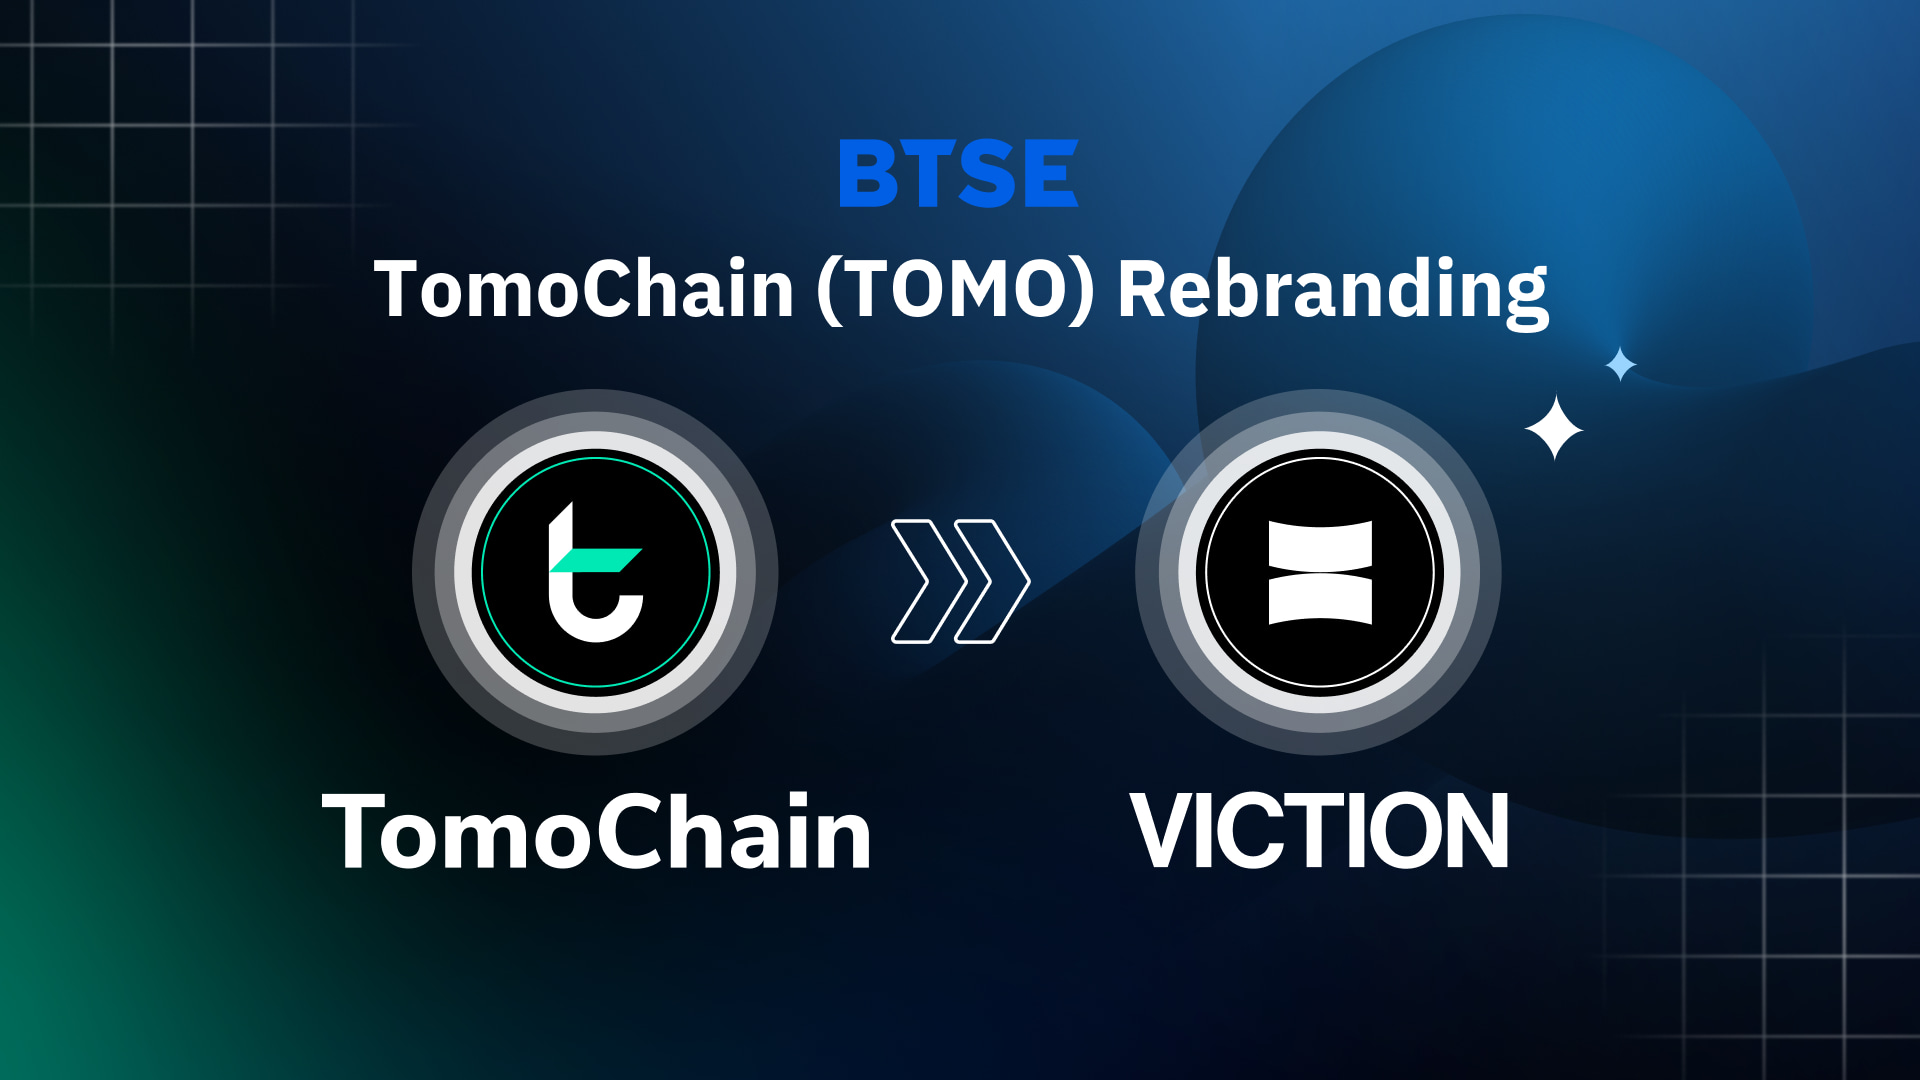 Completion of TomoChain (TOMO) Token Swap and Rebranding to Viction (VIC) on BTSE